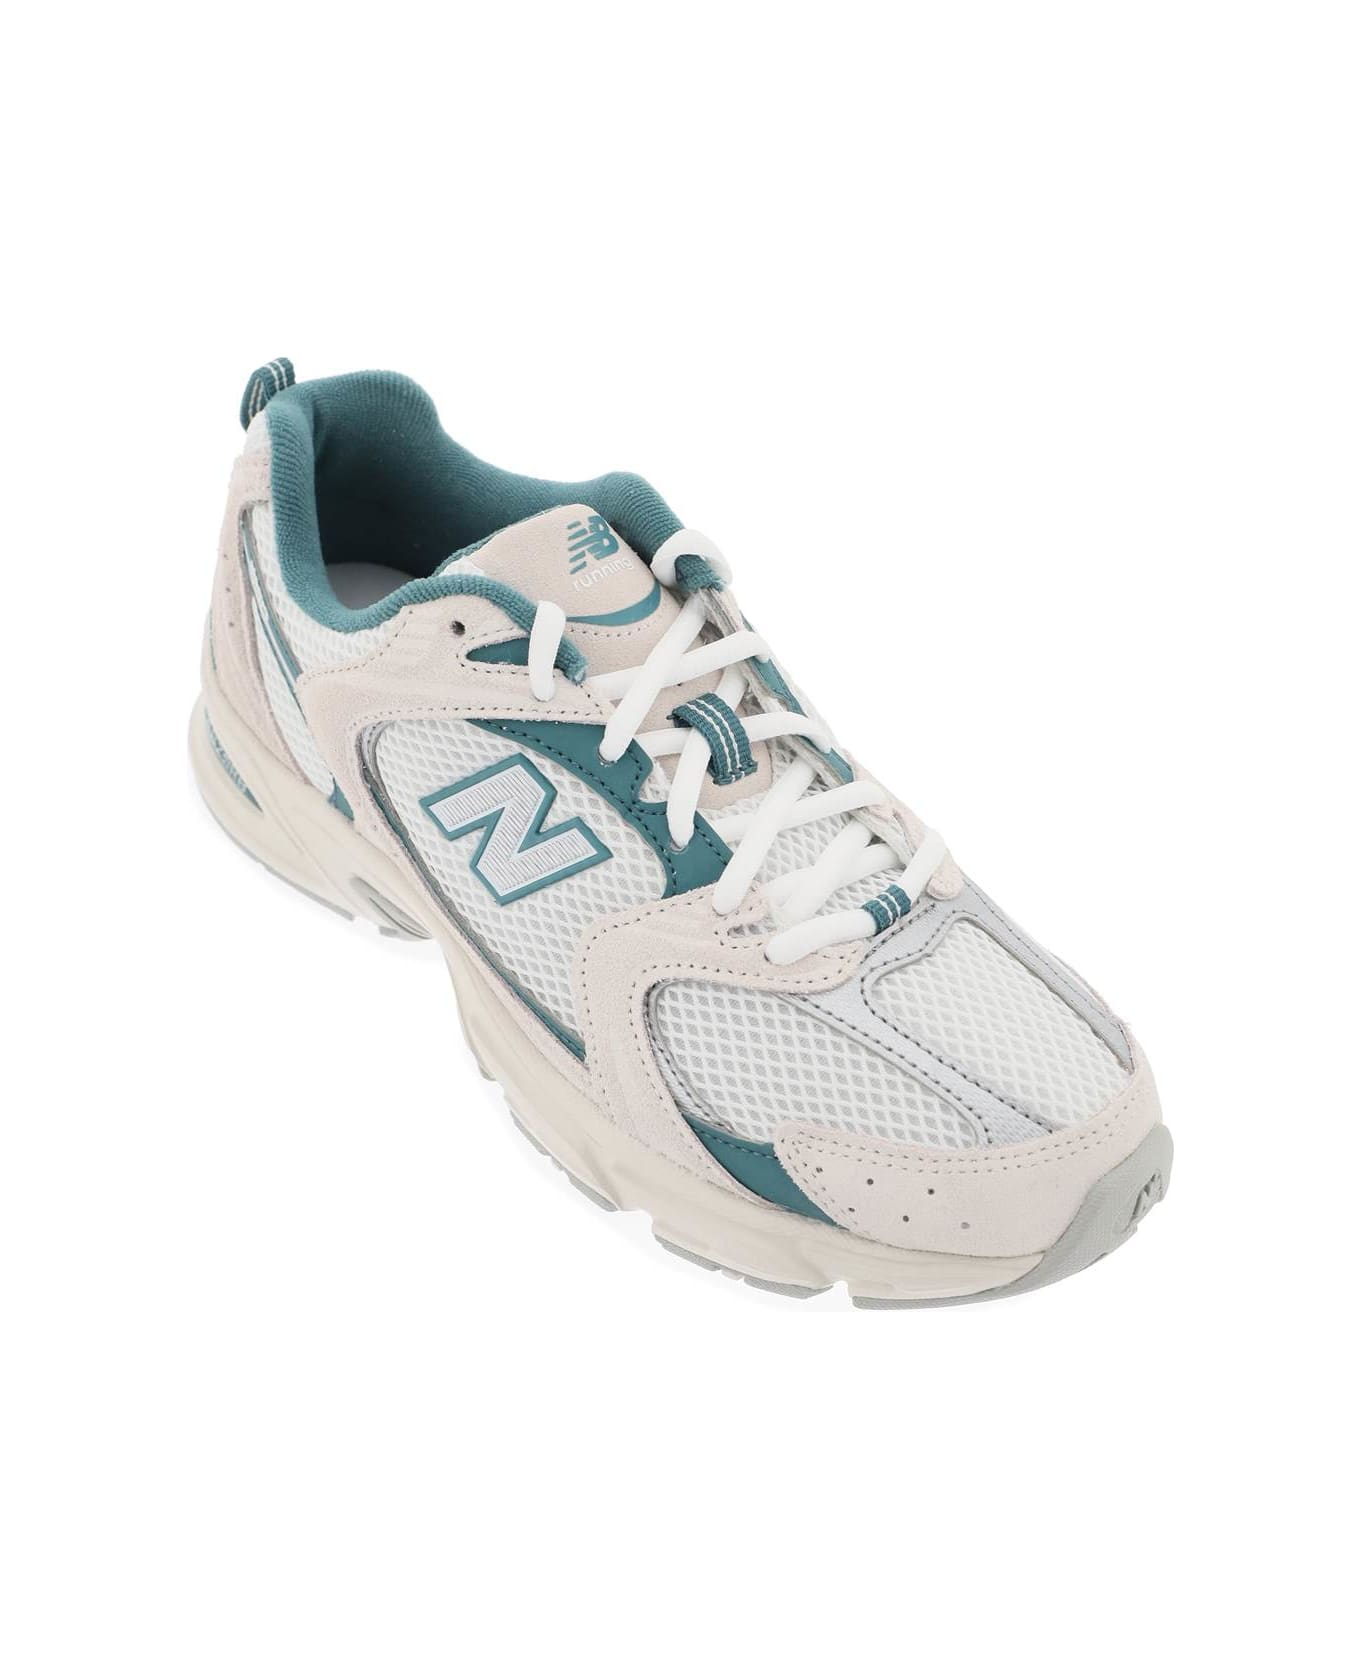 New Balance 530 Sneakers - REFLECTION (White)